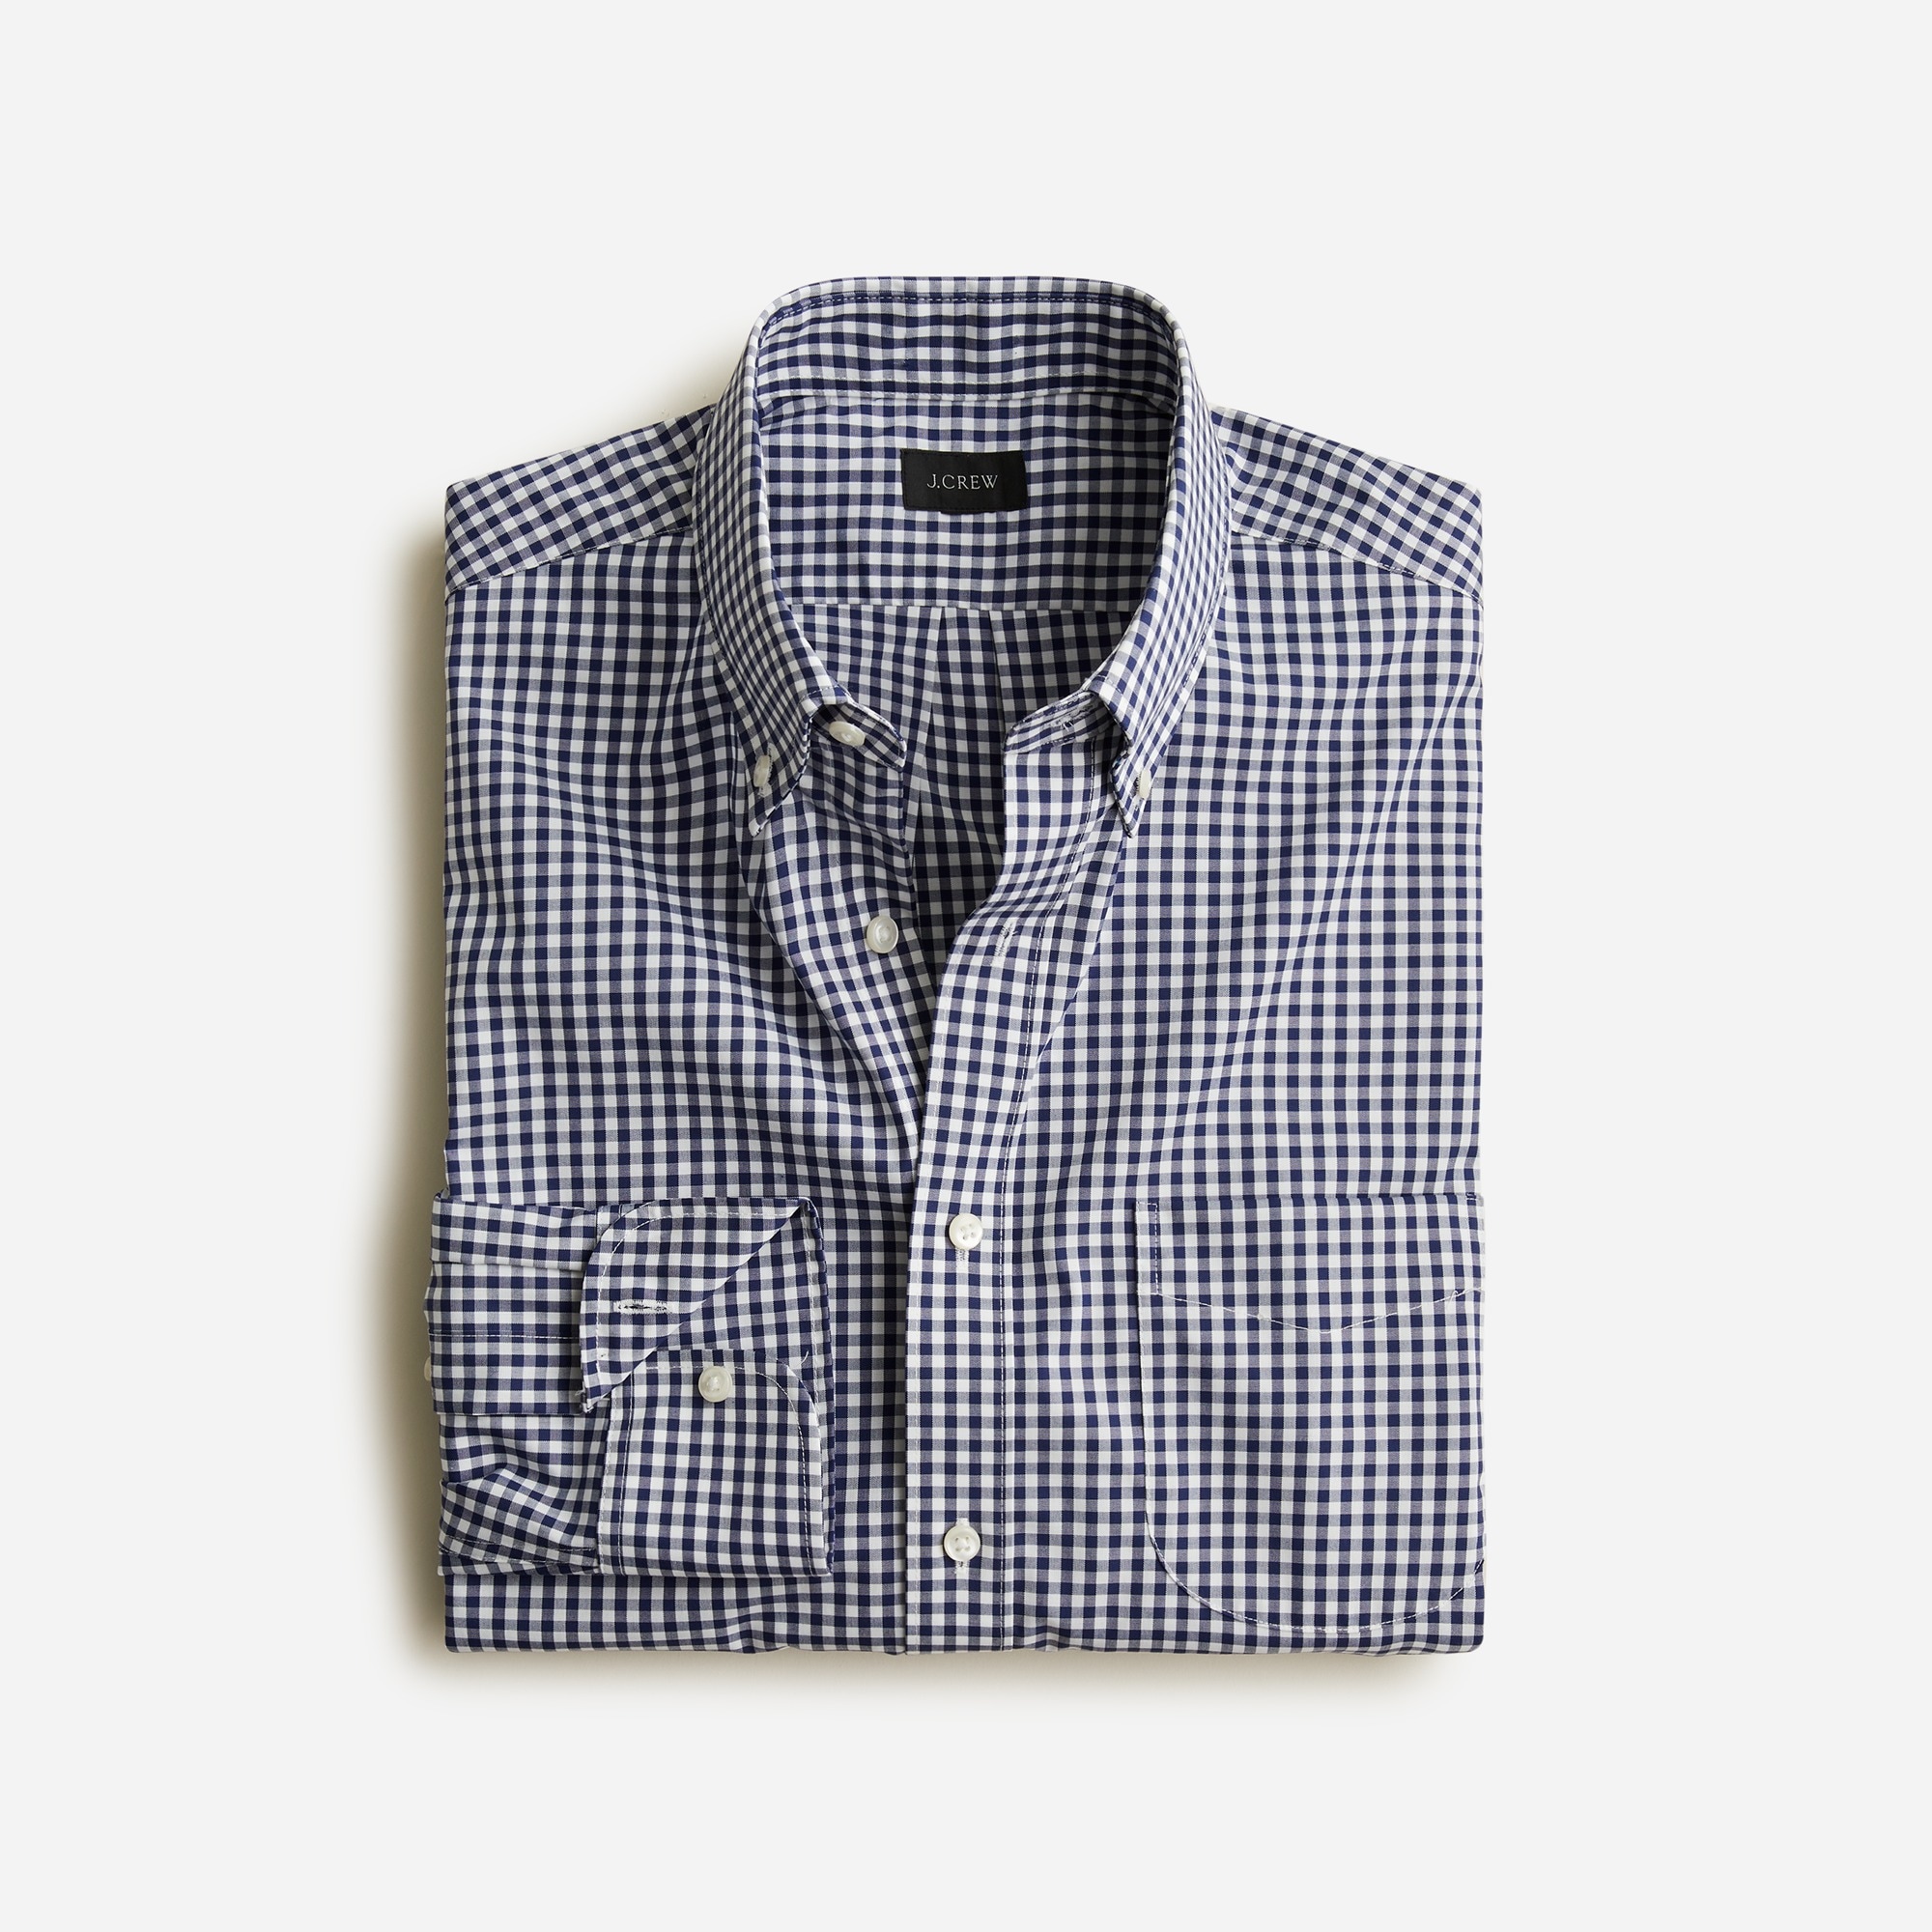  Slim Bowery wrinkle-free dress shirt with button-down collar